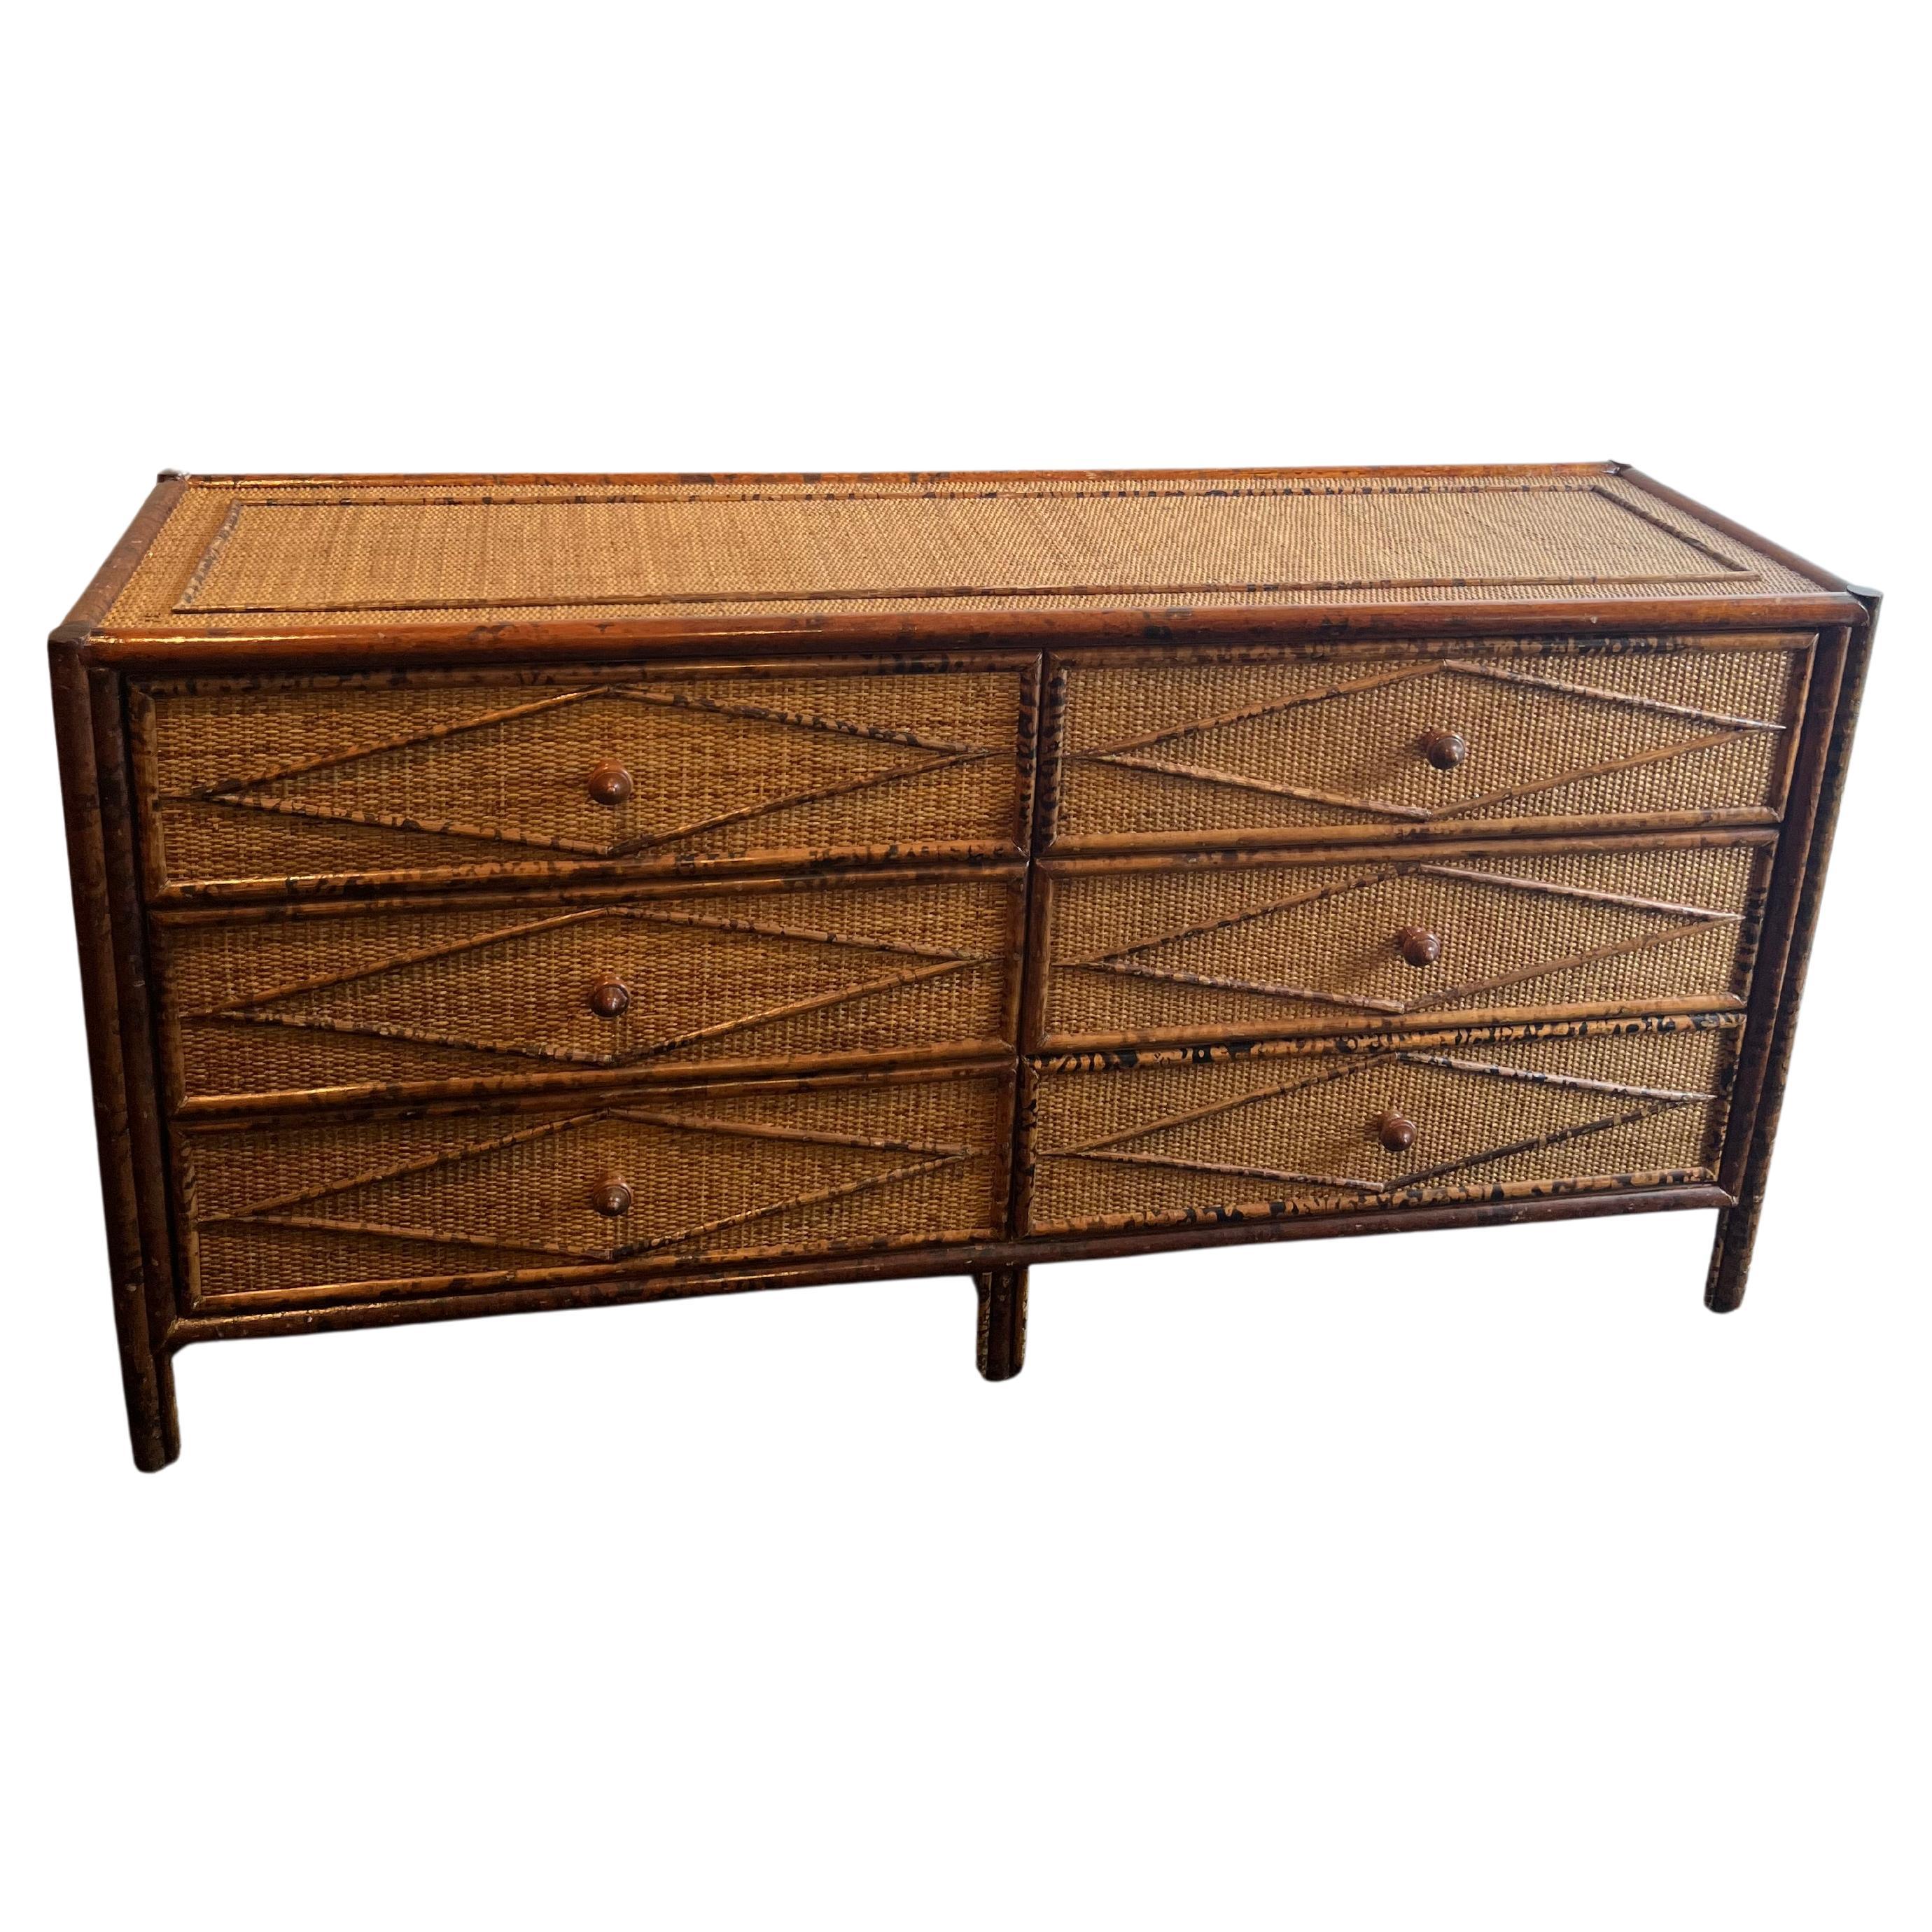 British Colonial Style Burnt Bamboo and Cane Dresser For Sale